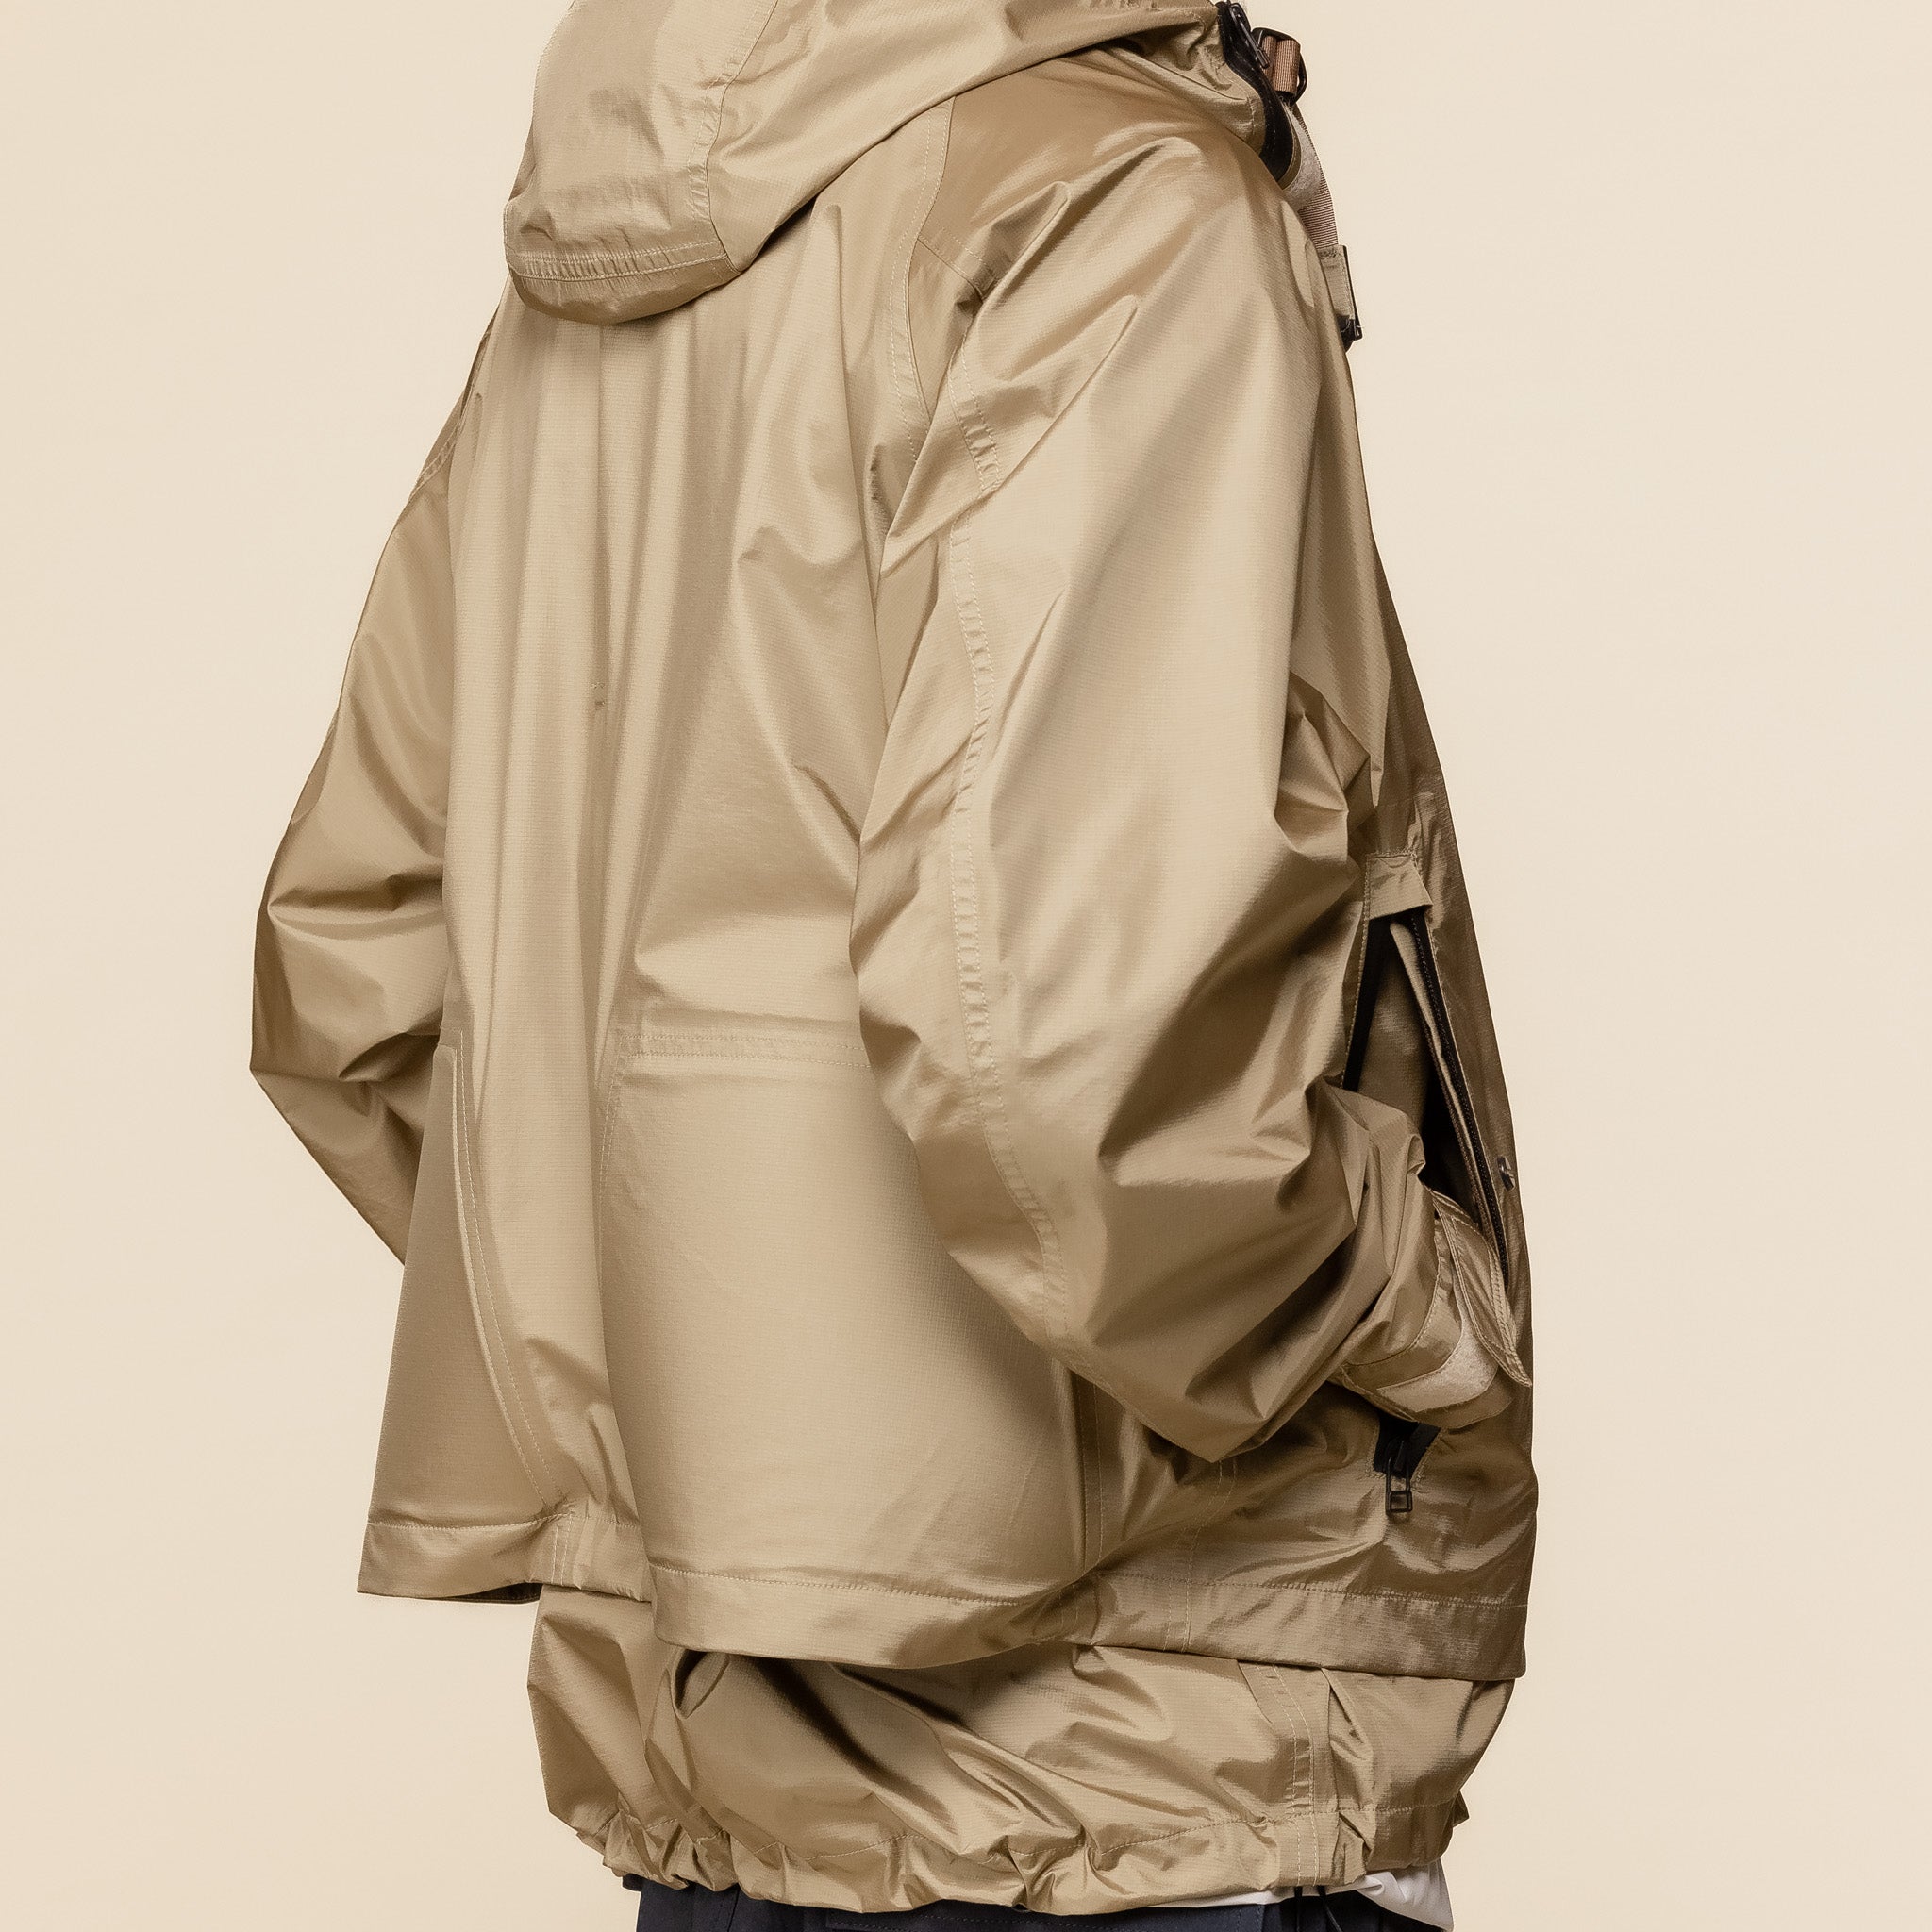 MW-JKT24103 Meanswhile - Air Circulation System Rain Jacket - Coyote